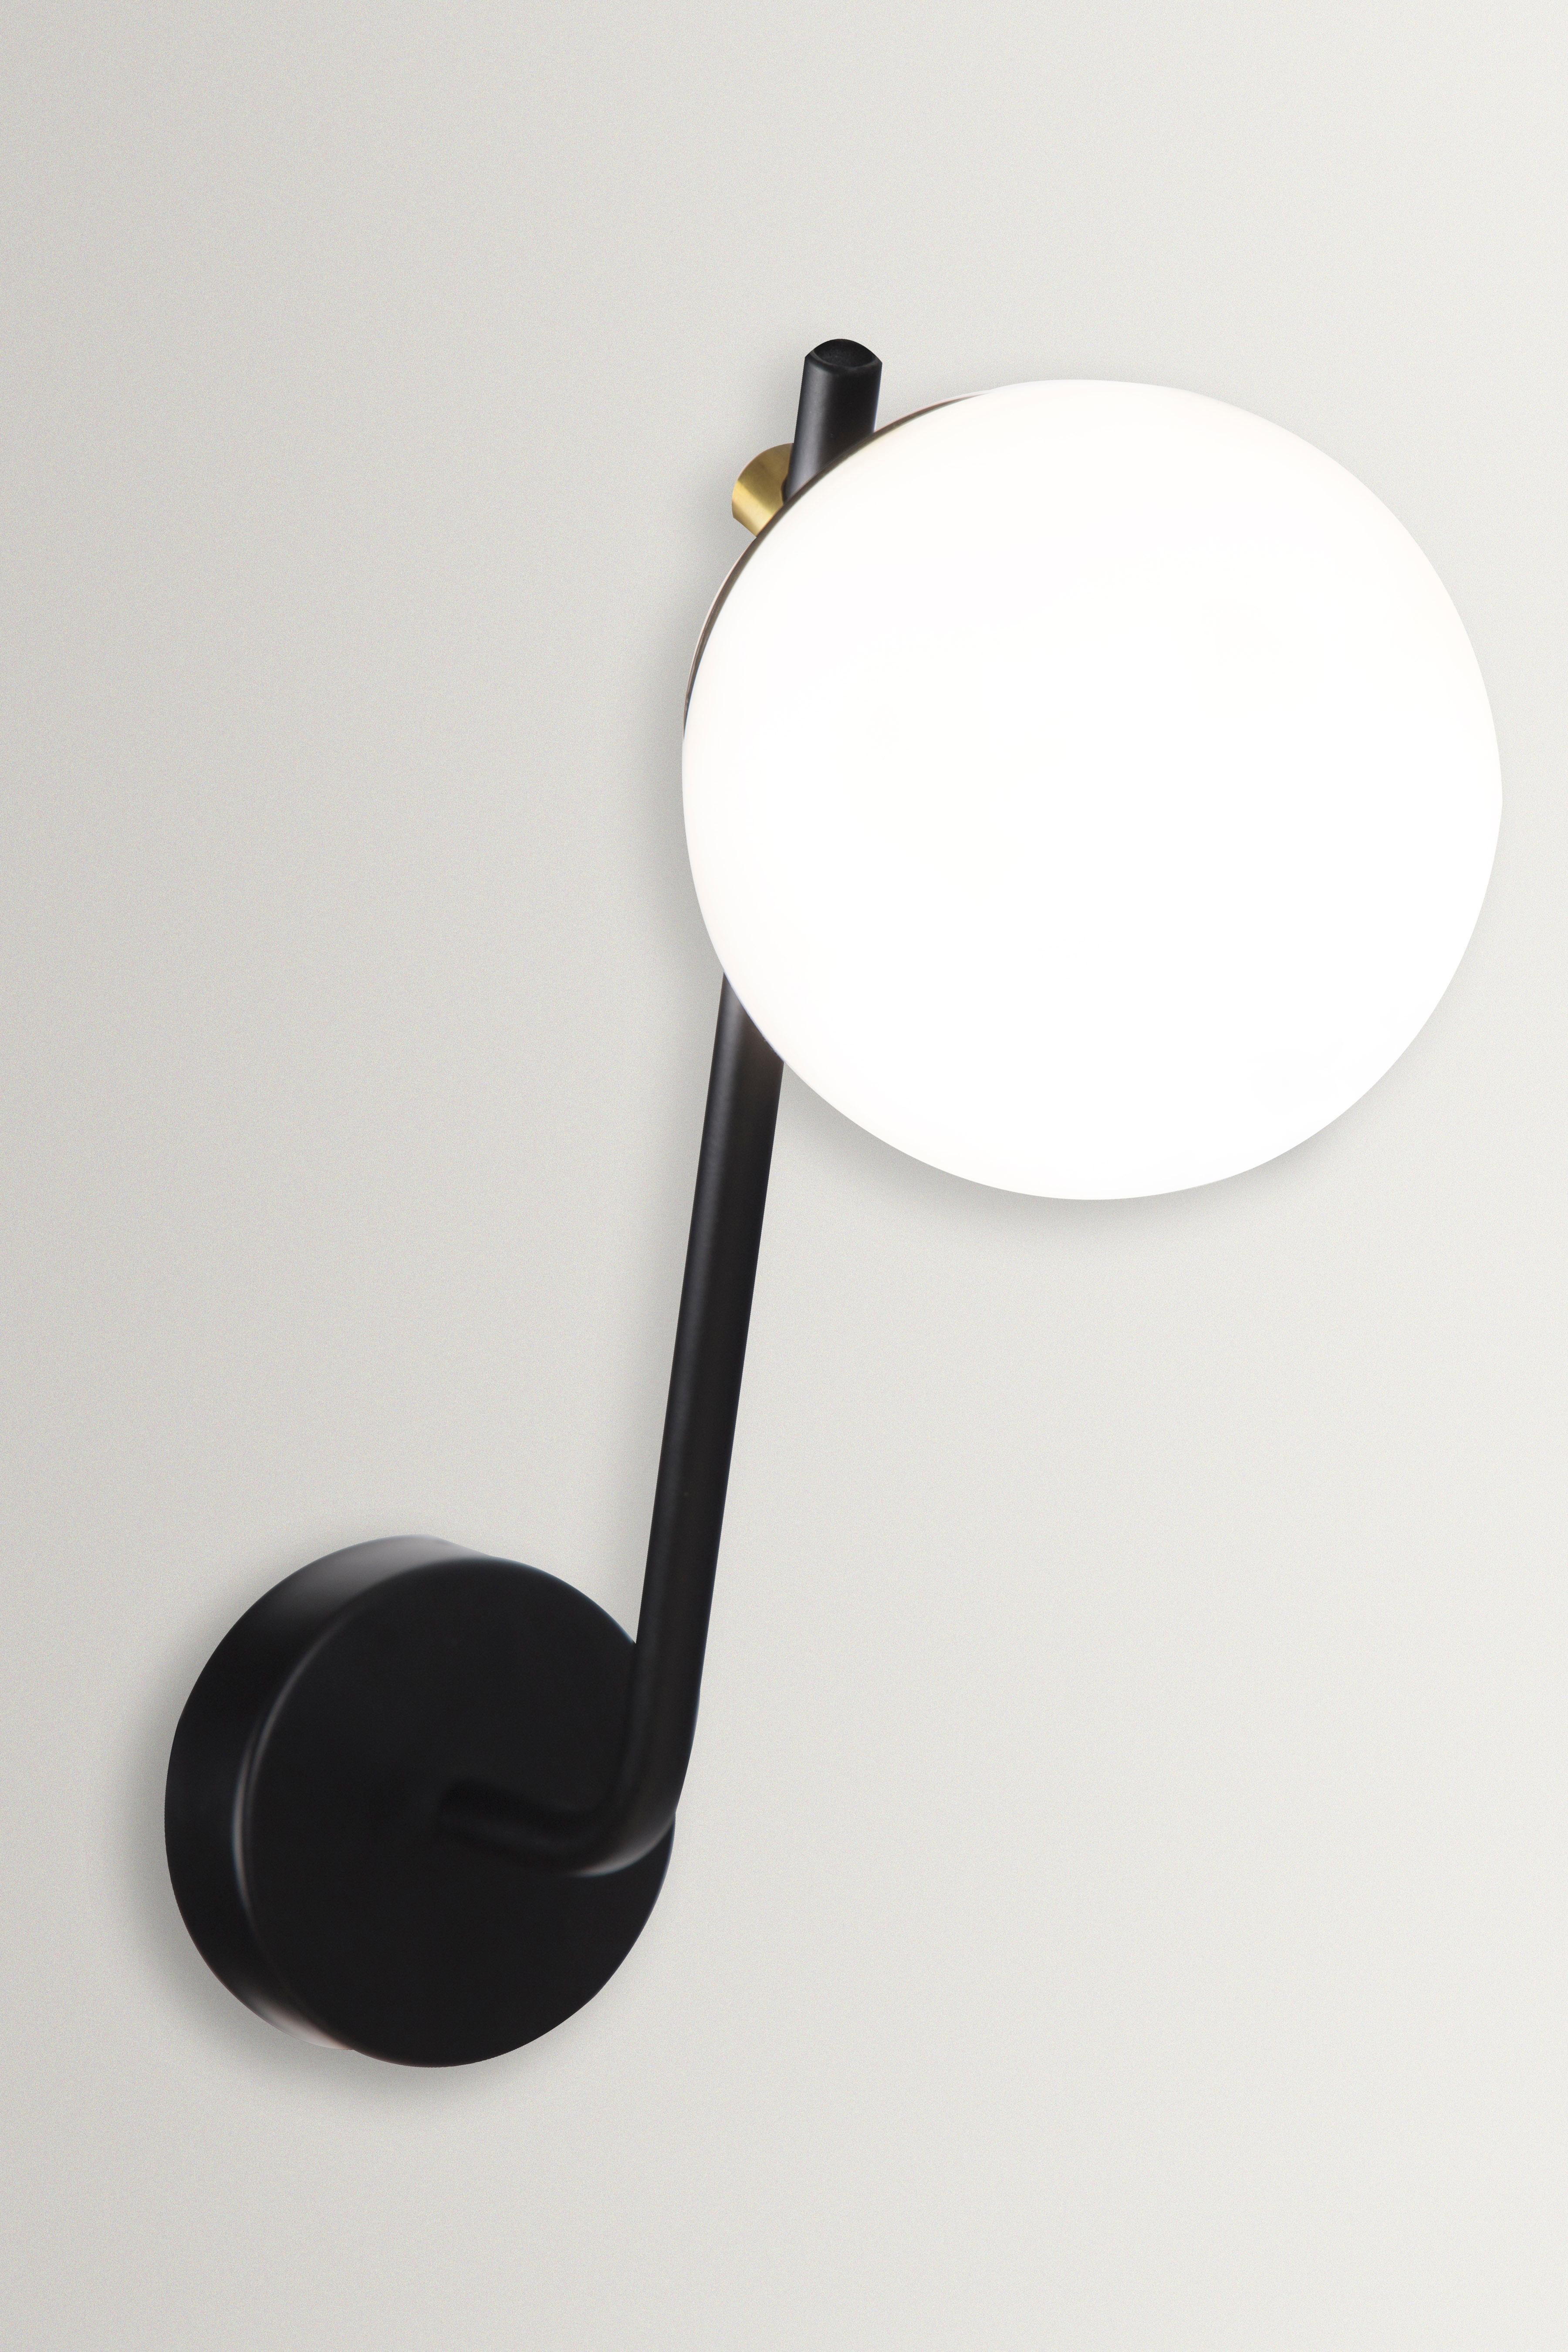 Esferra 120 wall lamp by Hatsu
Dimensions: D 29 x W 14 x H 41 cm 
Materials: Opal glass, powder coated aluminium

Hatsu is a design studio based in Mumbai that creates modern lighting that are unique and immediately recognisable. We started with